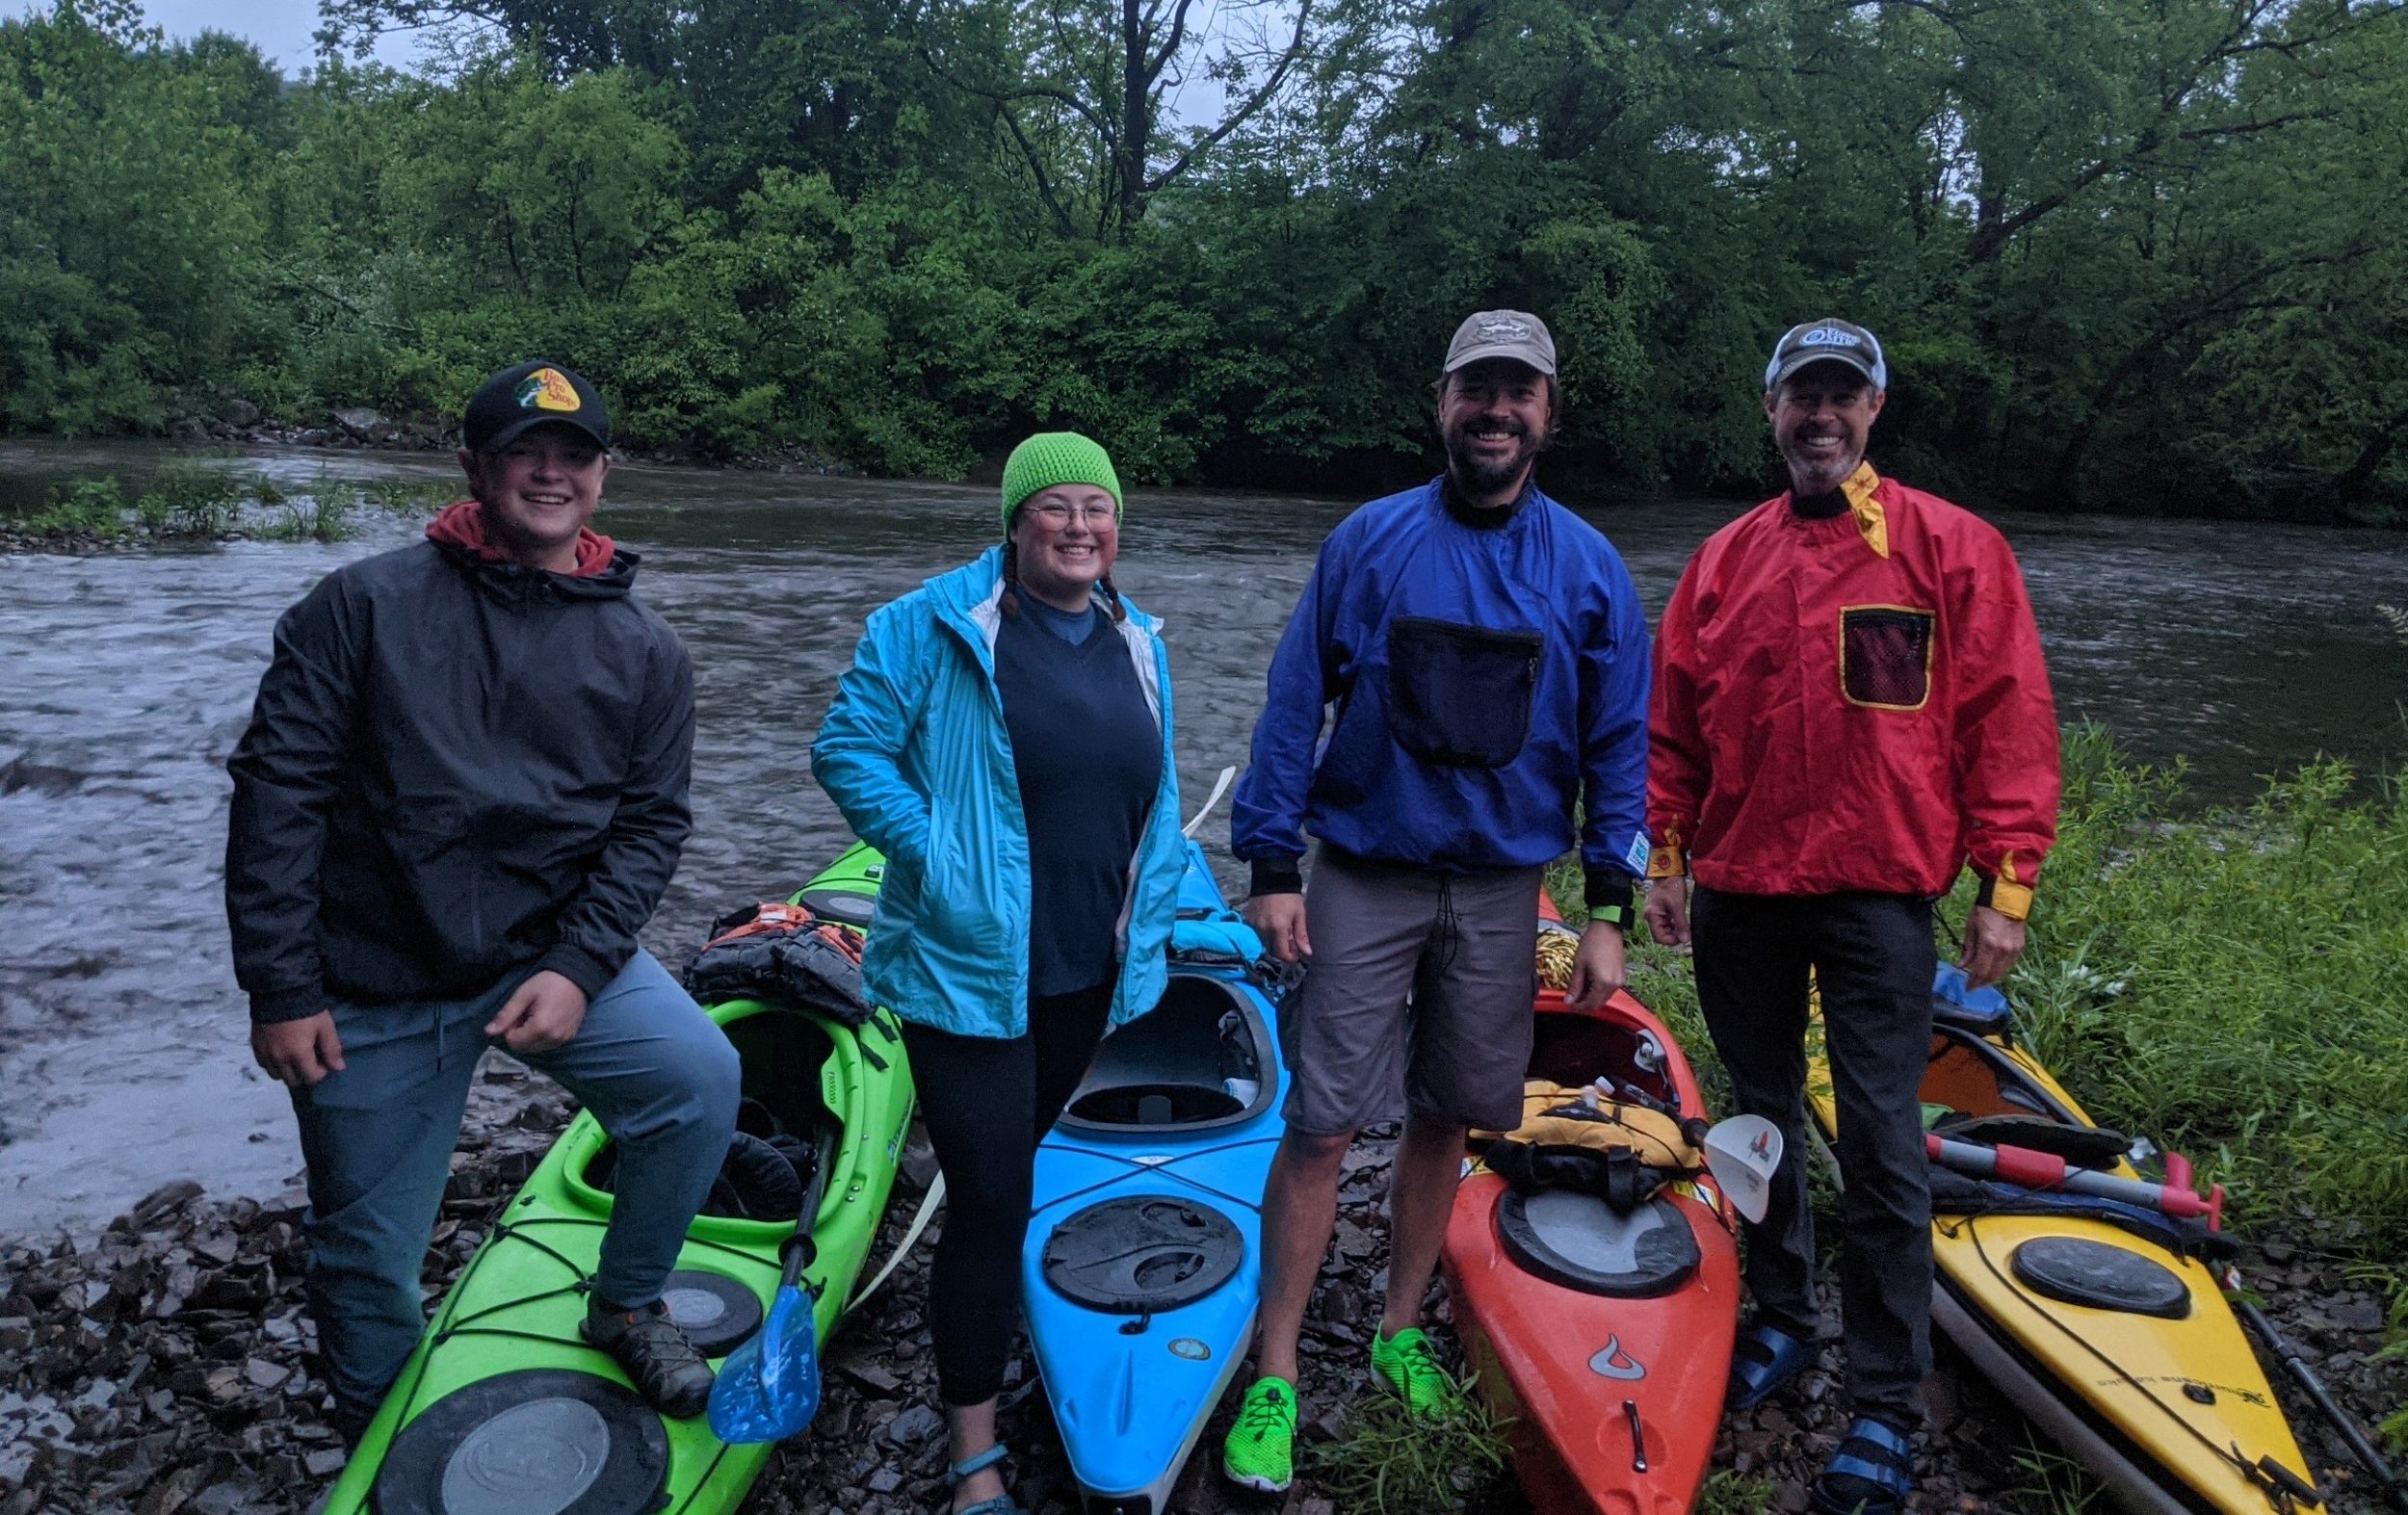 Crew about to take on 60 mile yak trip!